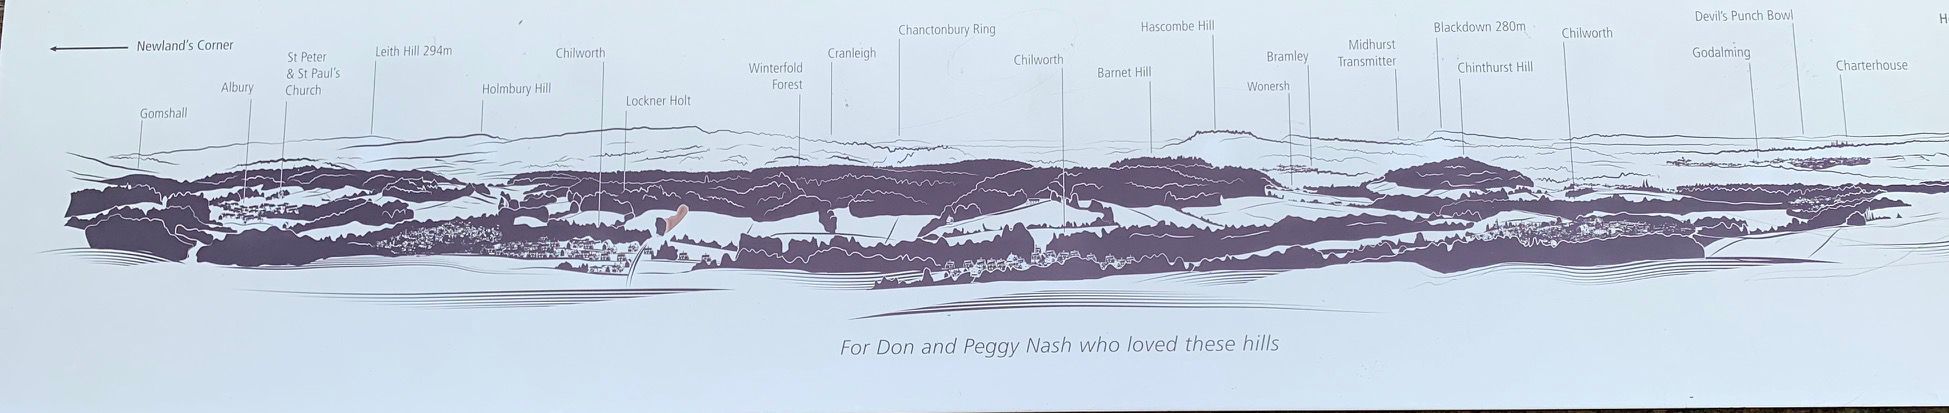 "For Don and Peggy Nash who loved these hills".